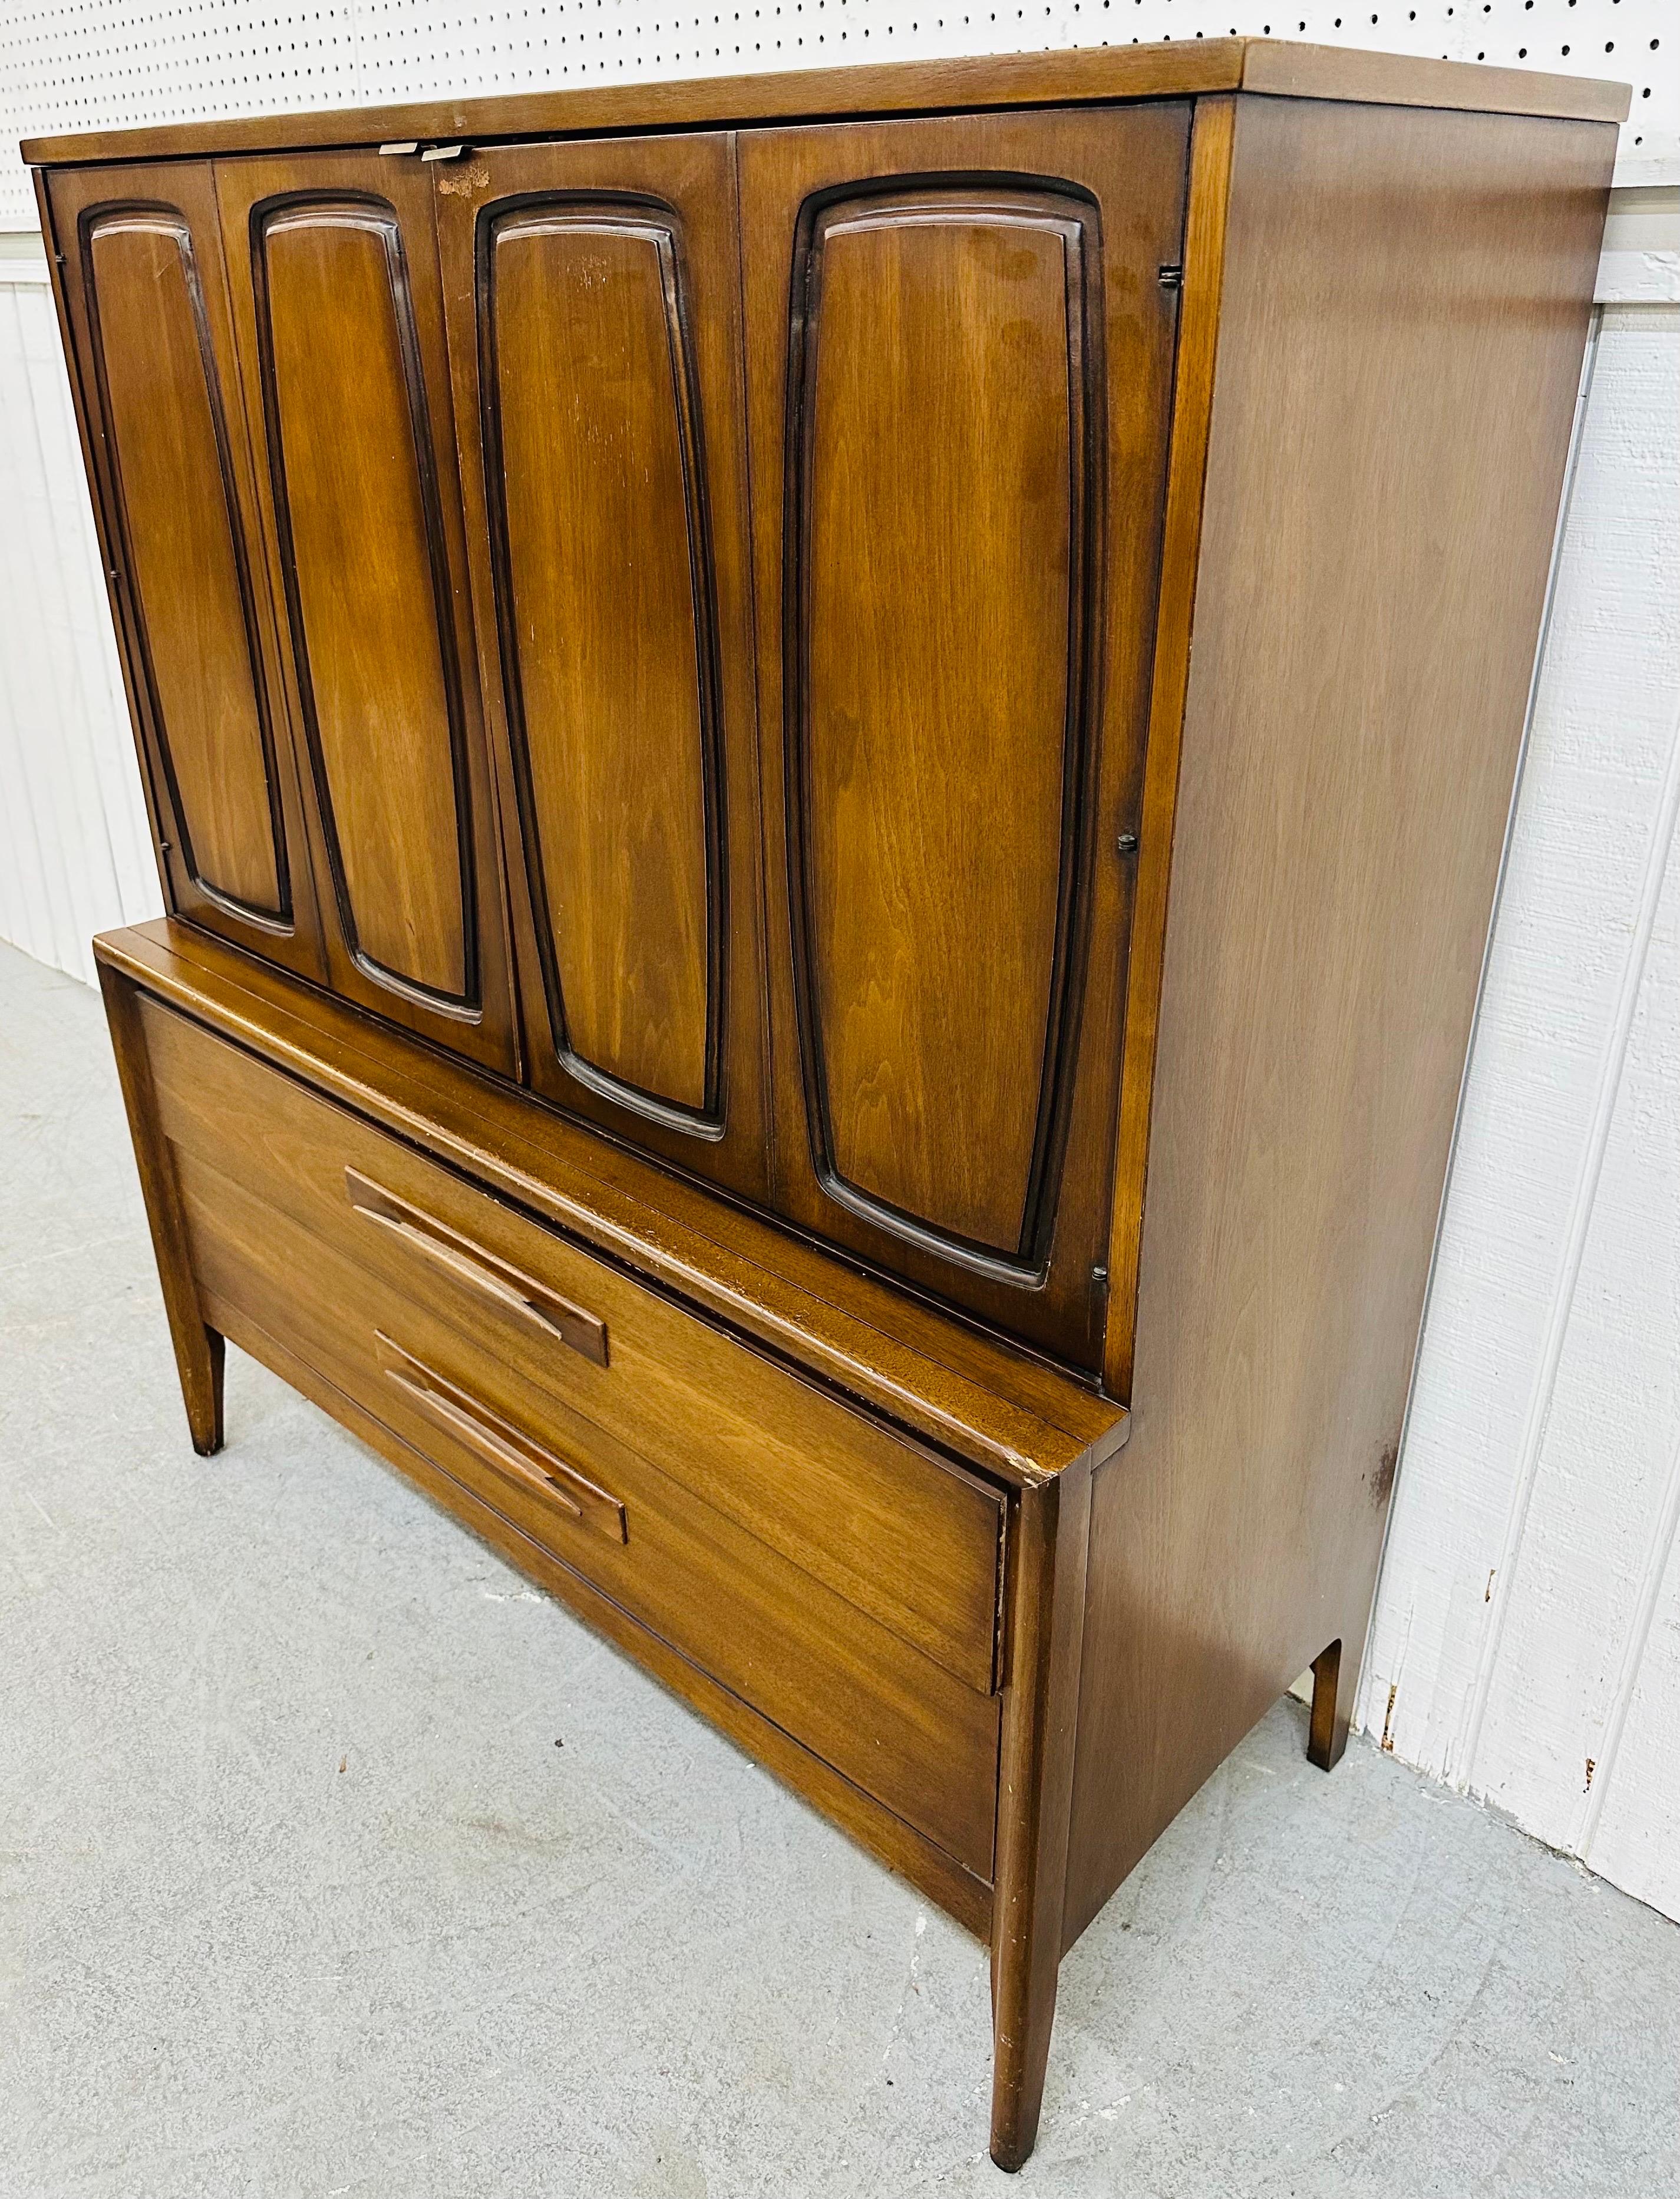 This listing is for a Mid-Century Modern Broyhill Emphasis Walnut Gentleman’s Chest. Featuring a straight line design, two large doors, with the Emphasis design, that open up to shelving and four small drawers, two large drawers at the bottom with